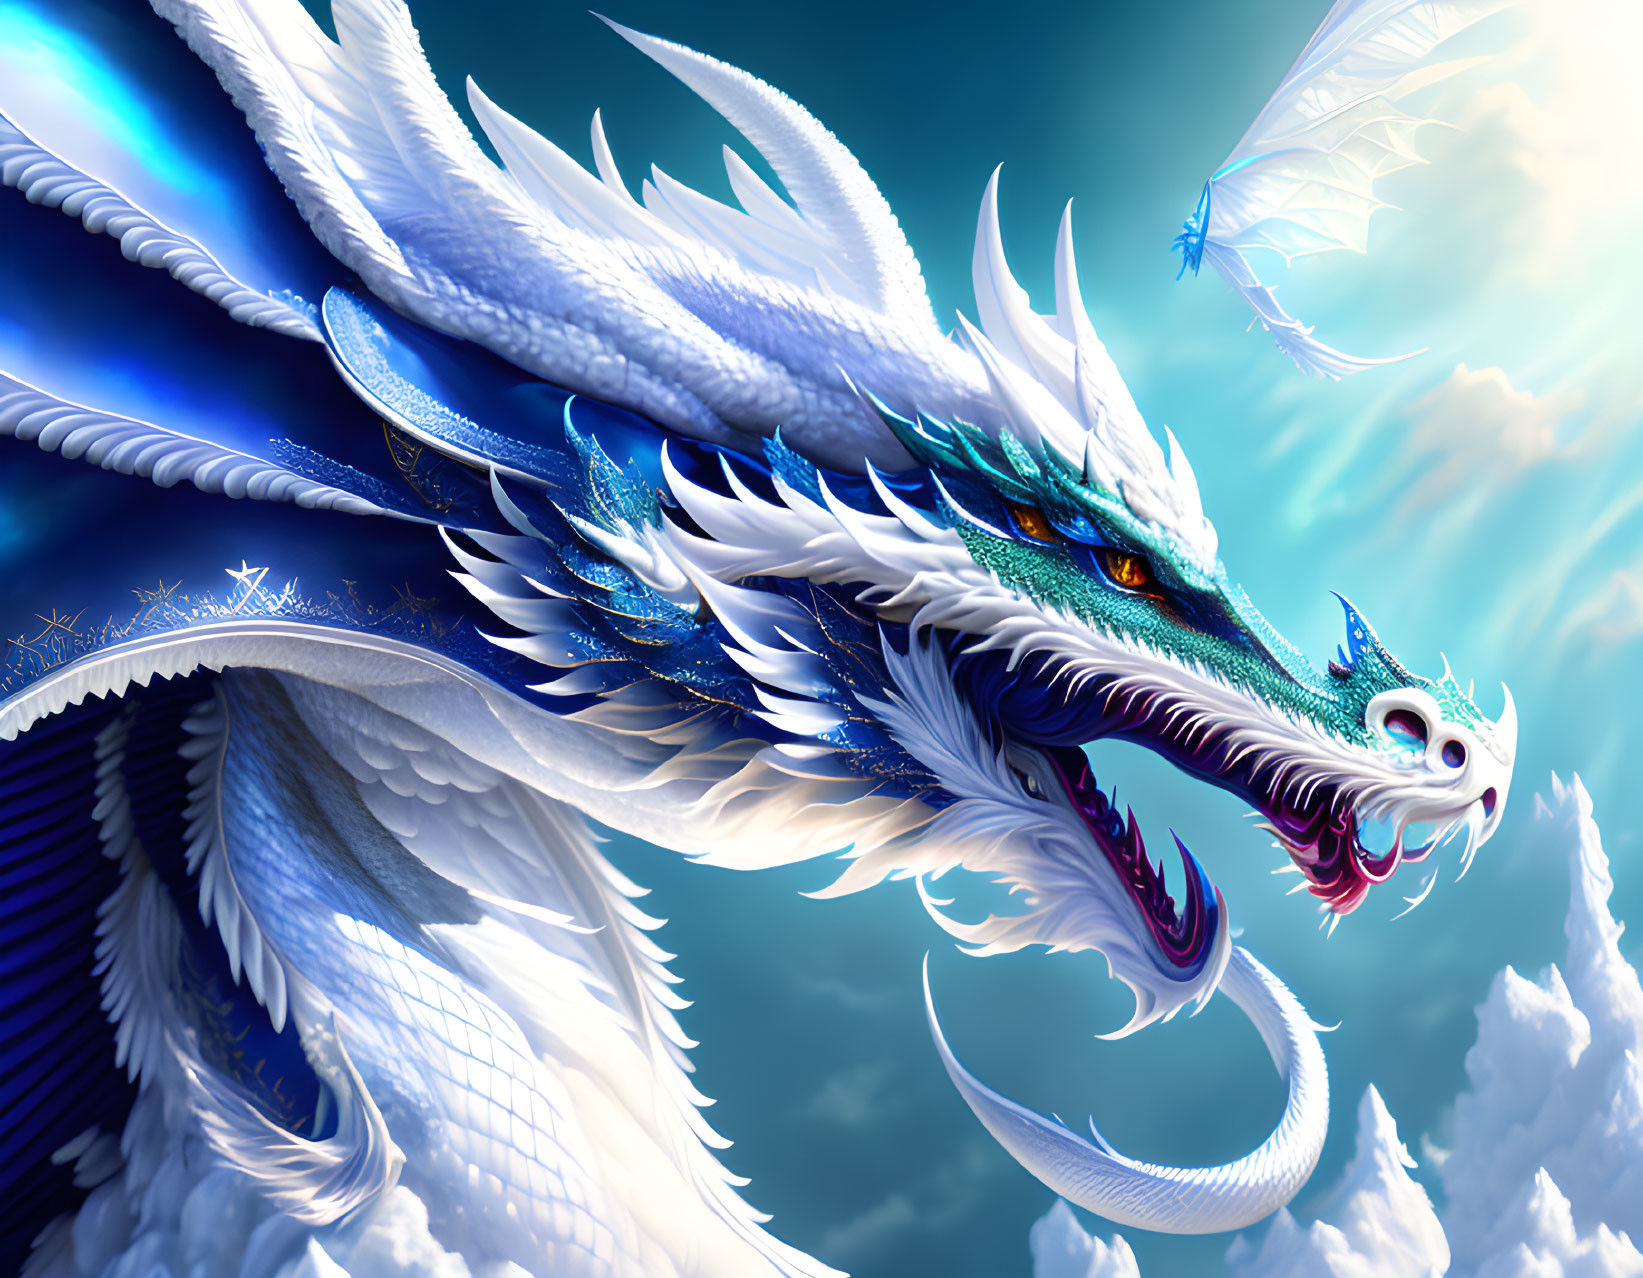 Majestic white and blue dragon with intricate wings in sky with smaller dragons and clouds.